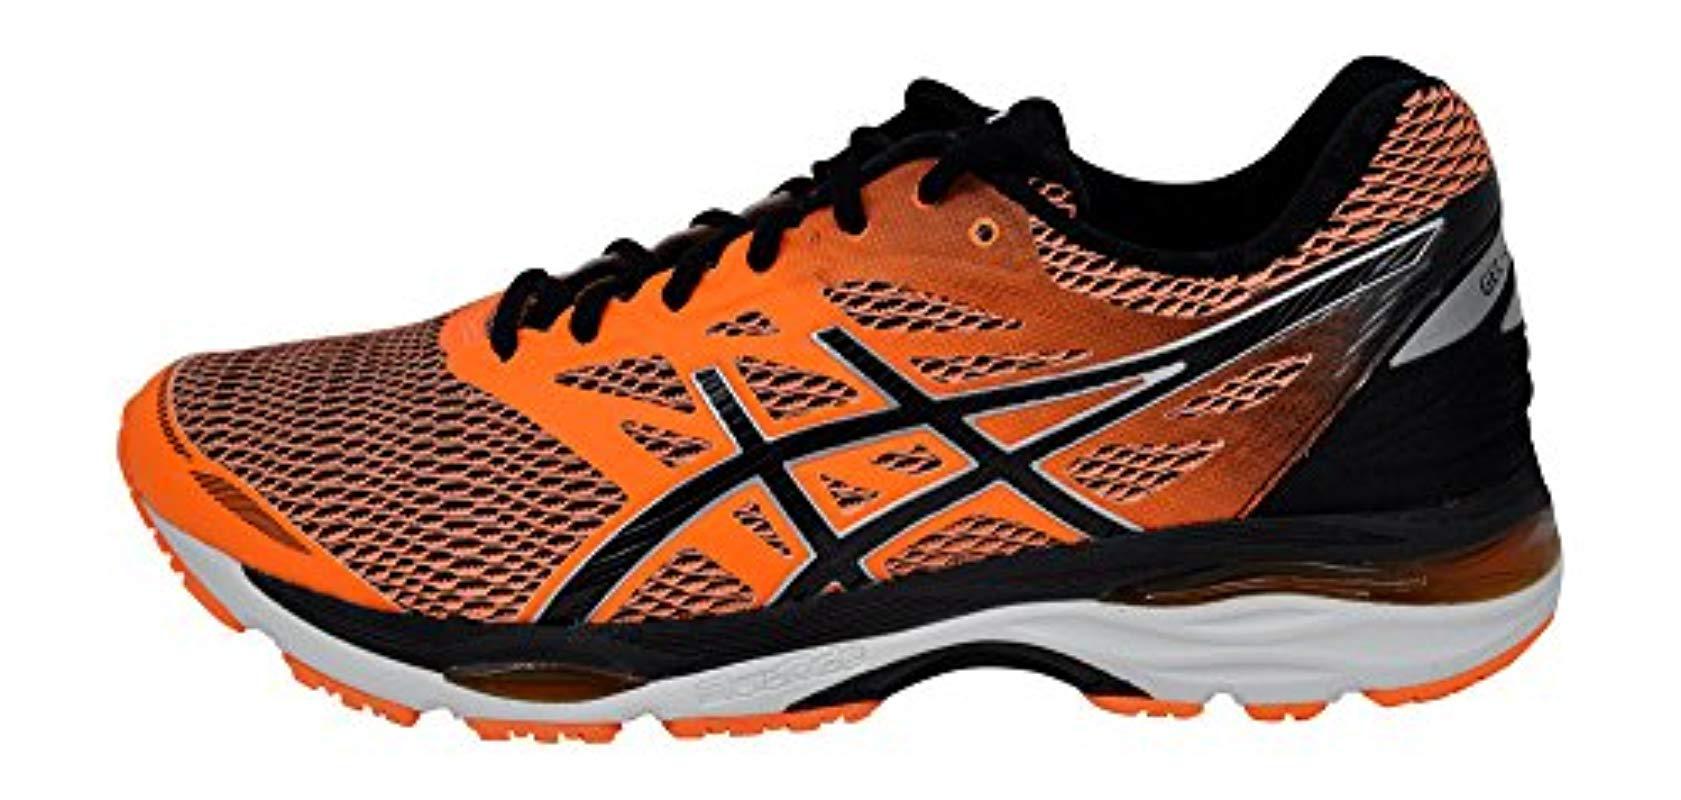 asics gel cumulus 18 homme orange,www.spinephysiotherapy.com